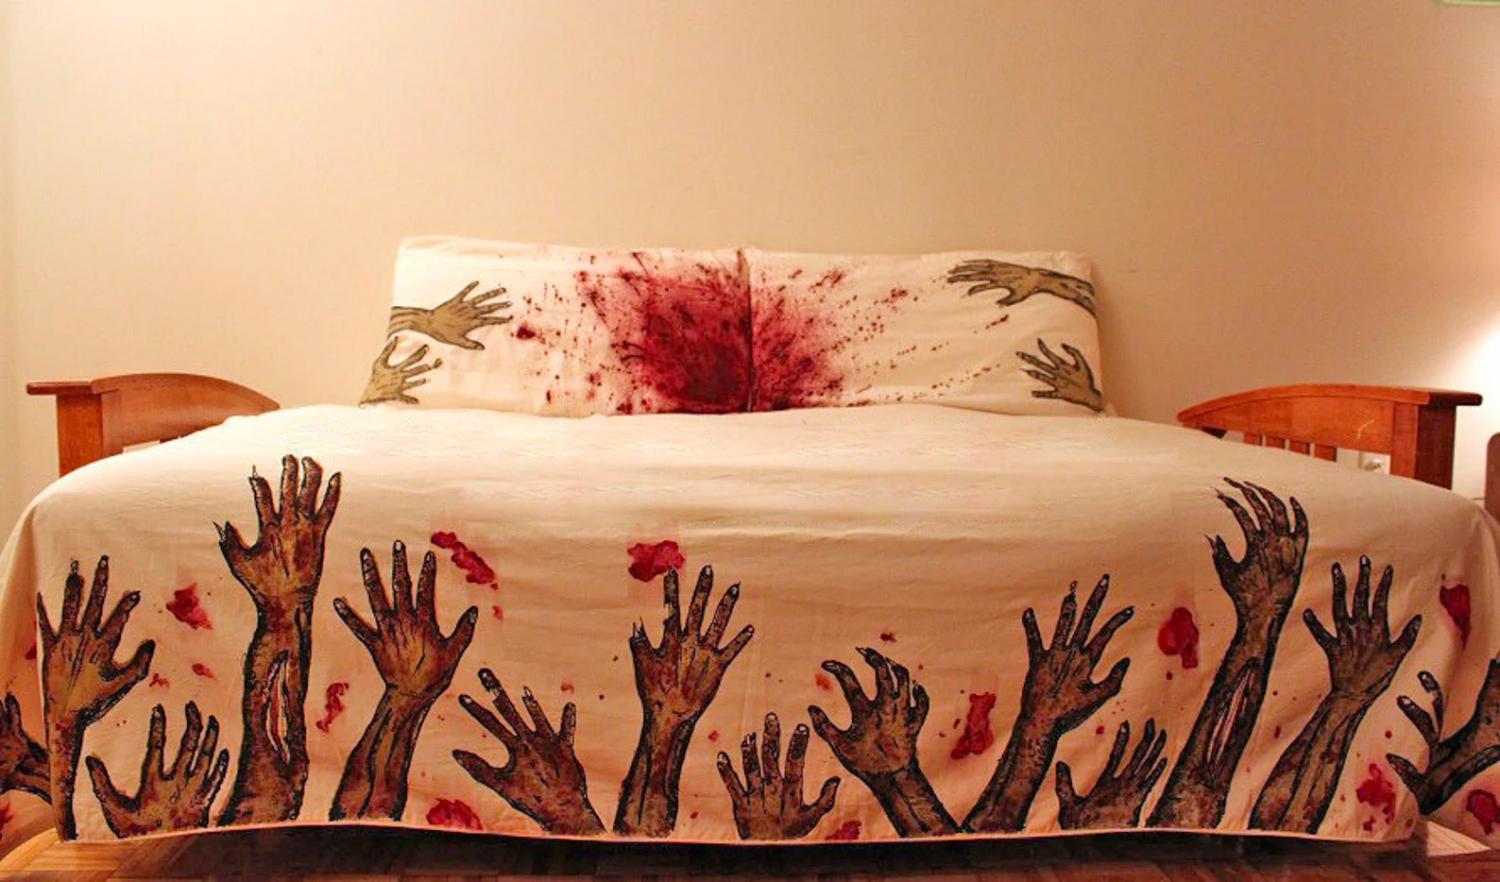 White colored bedsheet with zombie hands and blood on the edges